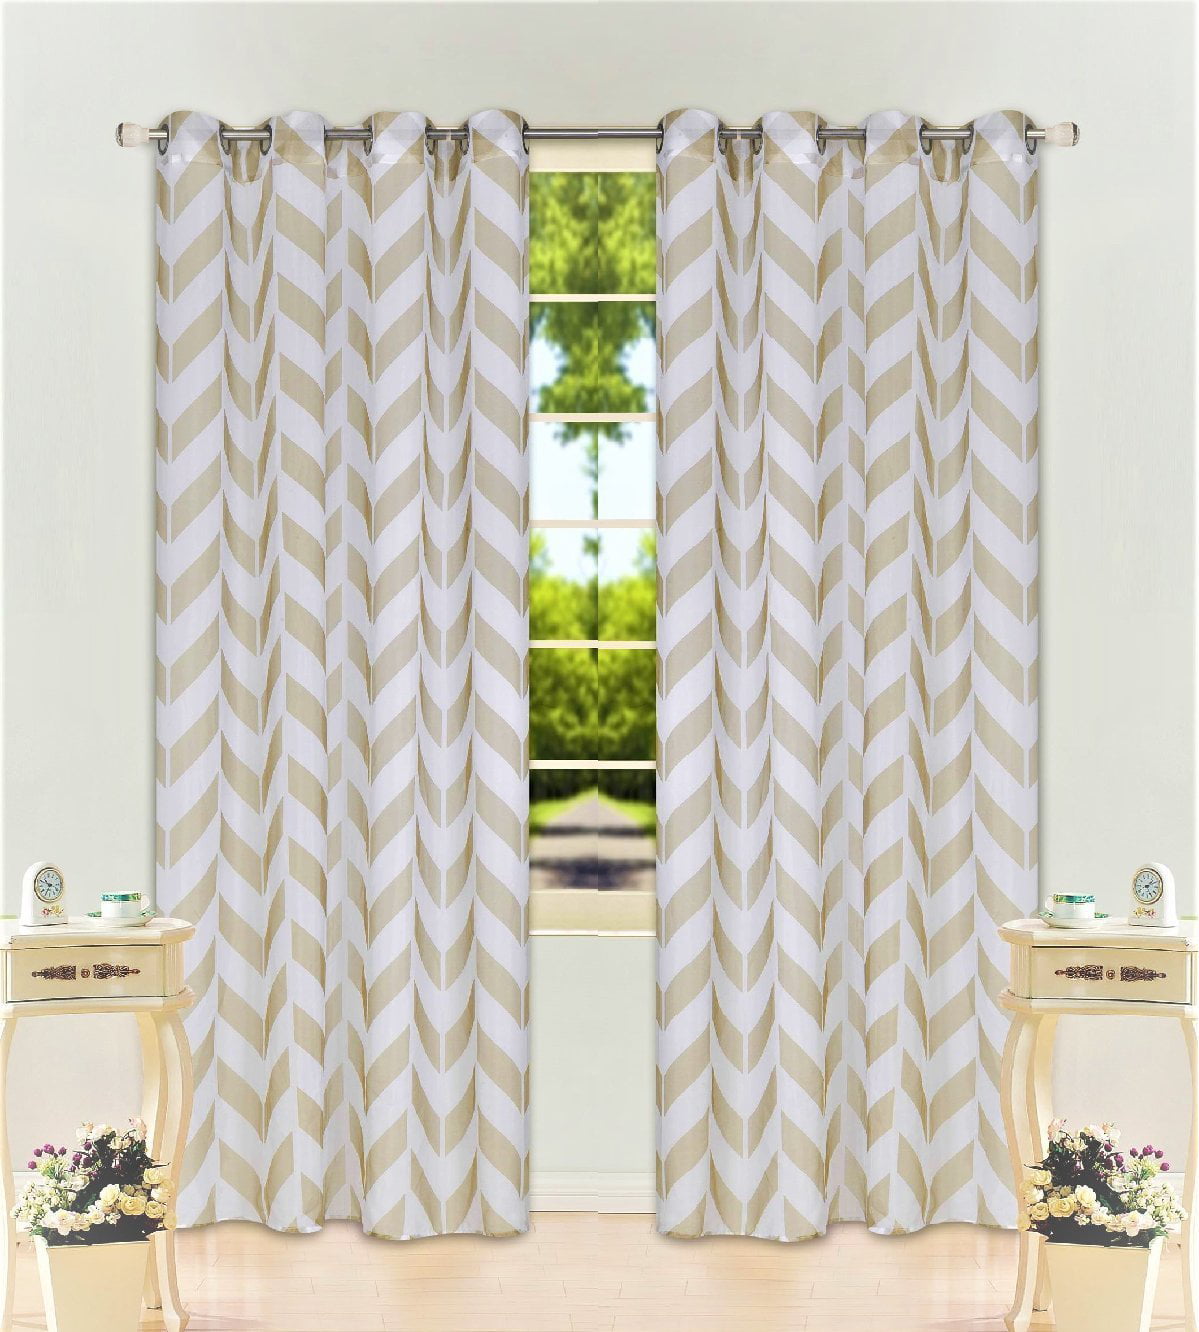 1PC GROMMET VOILE SHEER WINDOW PANEL CURTAIN GEOMETRIC PRINTED IVORY/TAUPE S38 